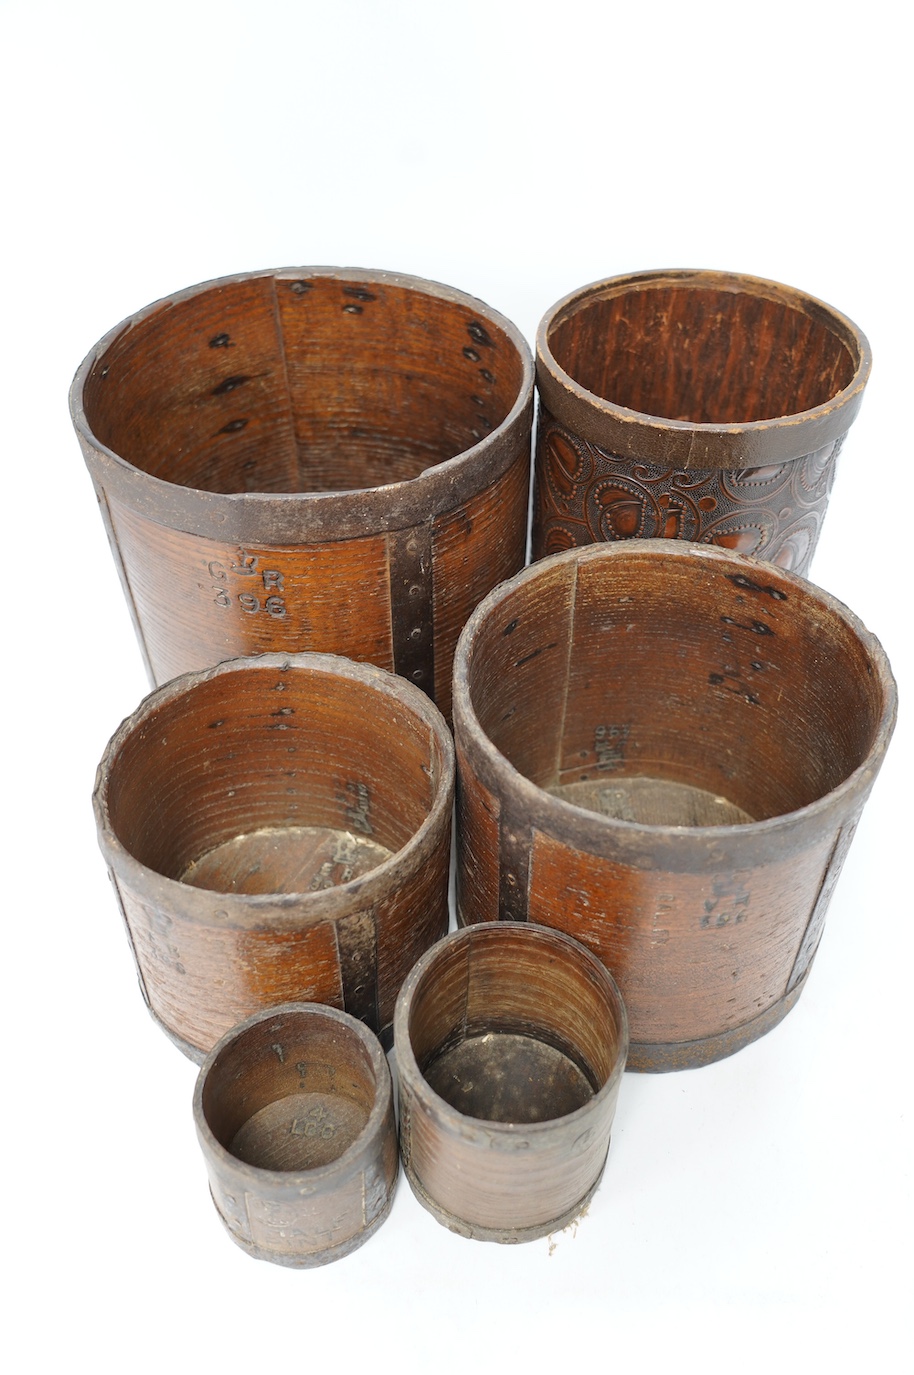 A matched set of five early 20th century iron bound bushel measures, one peck to half pint, together with a pressed card paper basket. Condition - fair to good